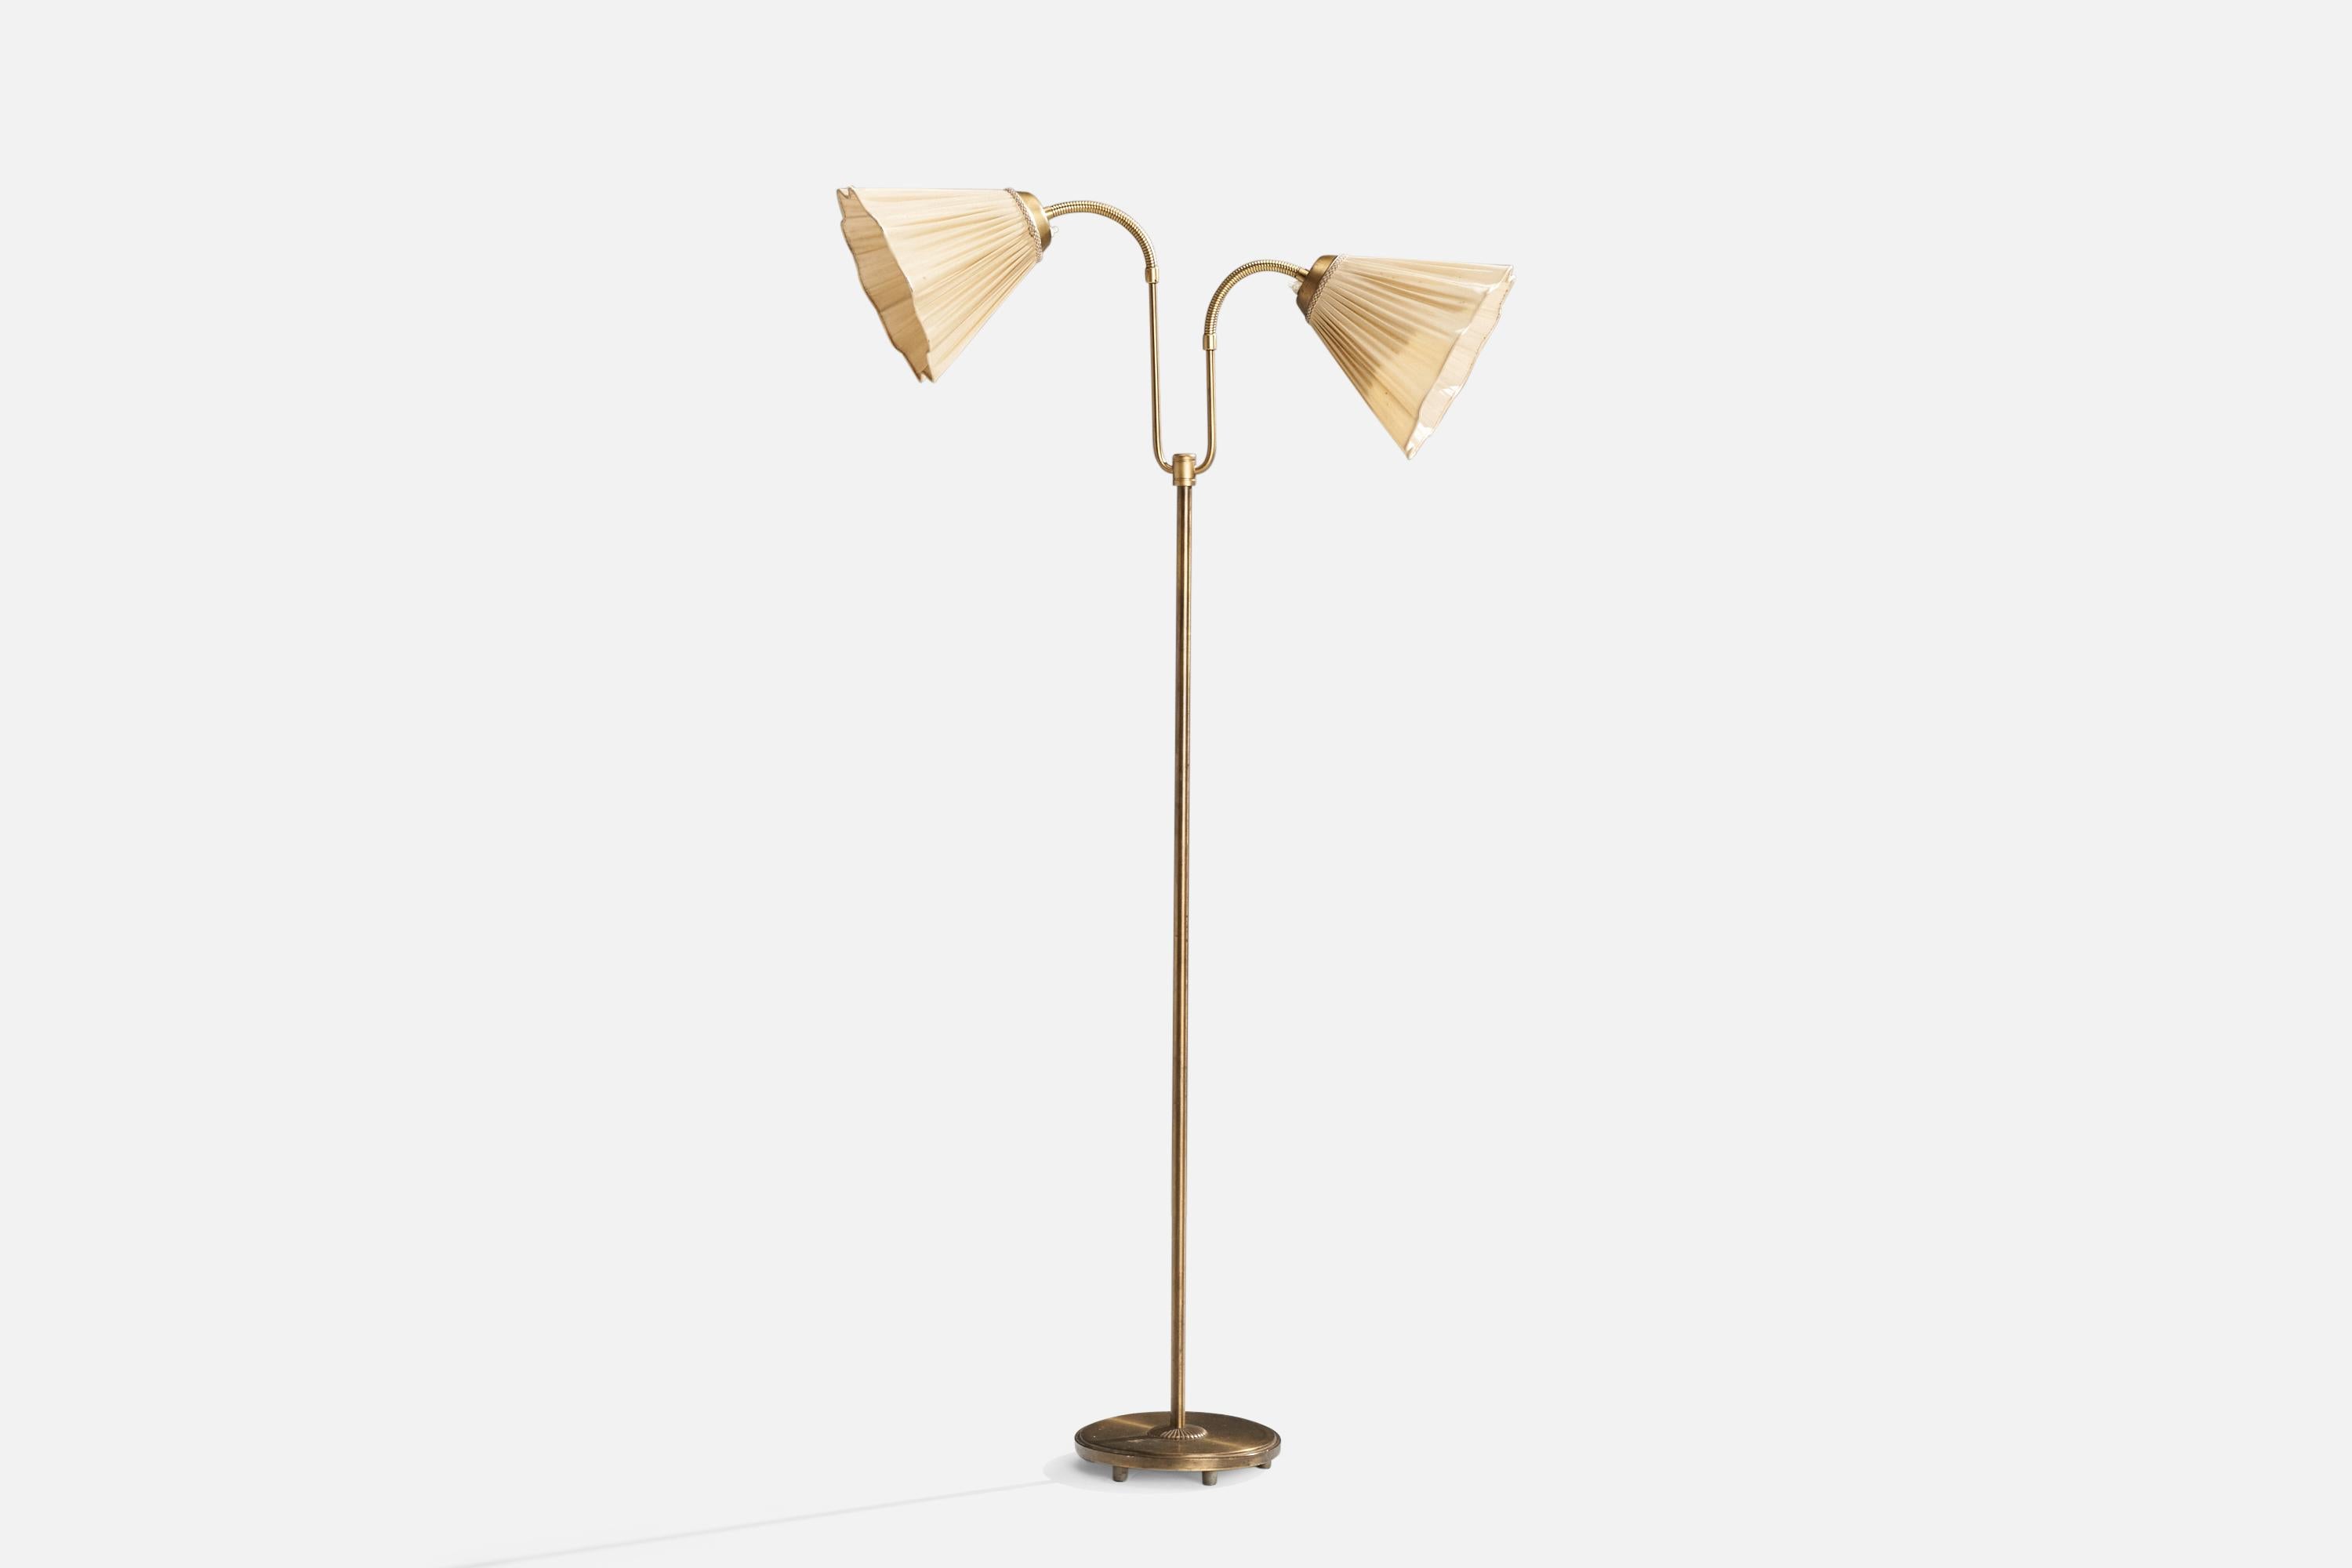 An adjustable brass and beige fabric floor lamp designed and produced in Sweden, c. 1940s.

Dimensions variable 
Overall Dimensions (inches): 61.25” H x 32.25” W x 12” D
Stated dimensions include shade.
Bulb Specifications: E-26 Bulb
Number of